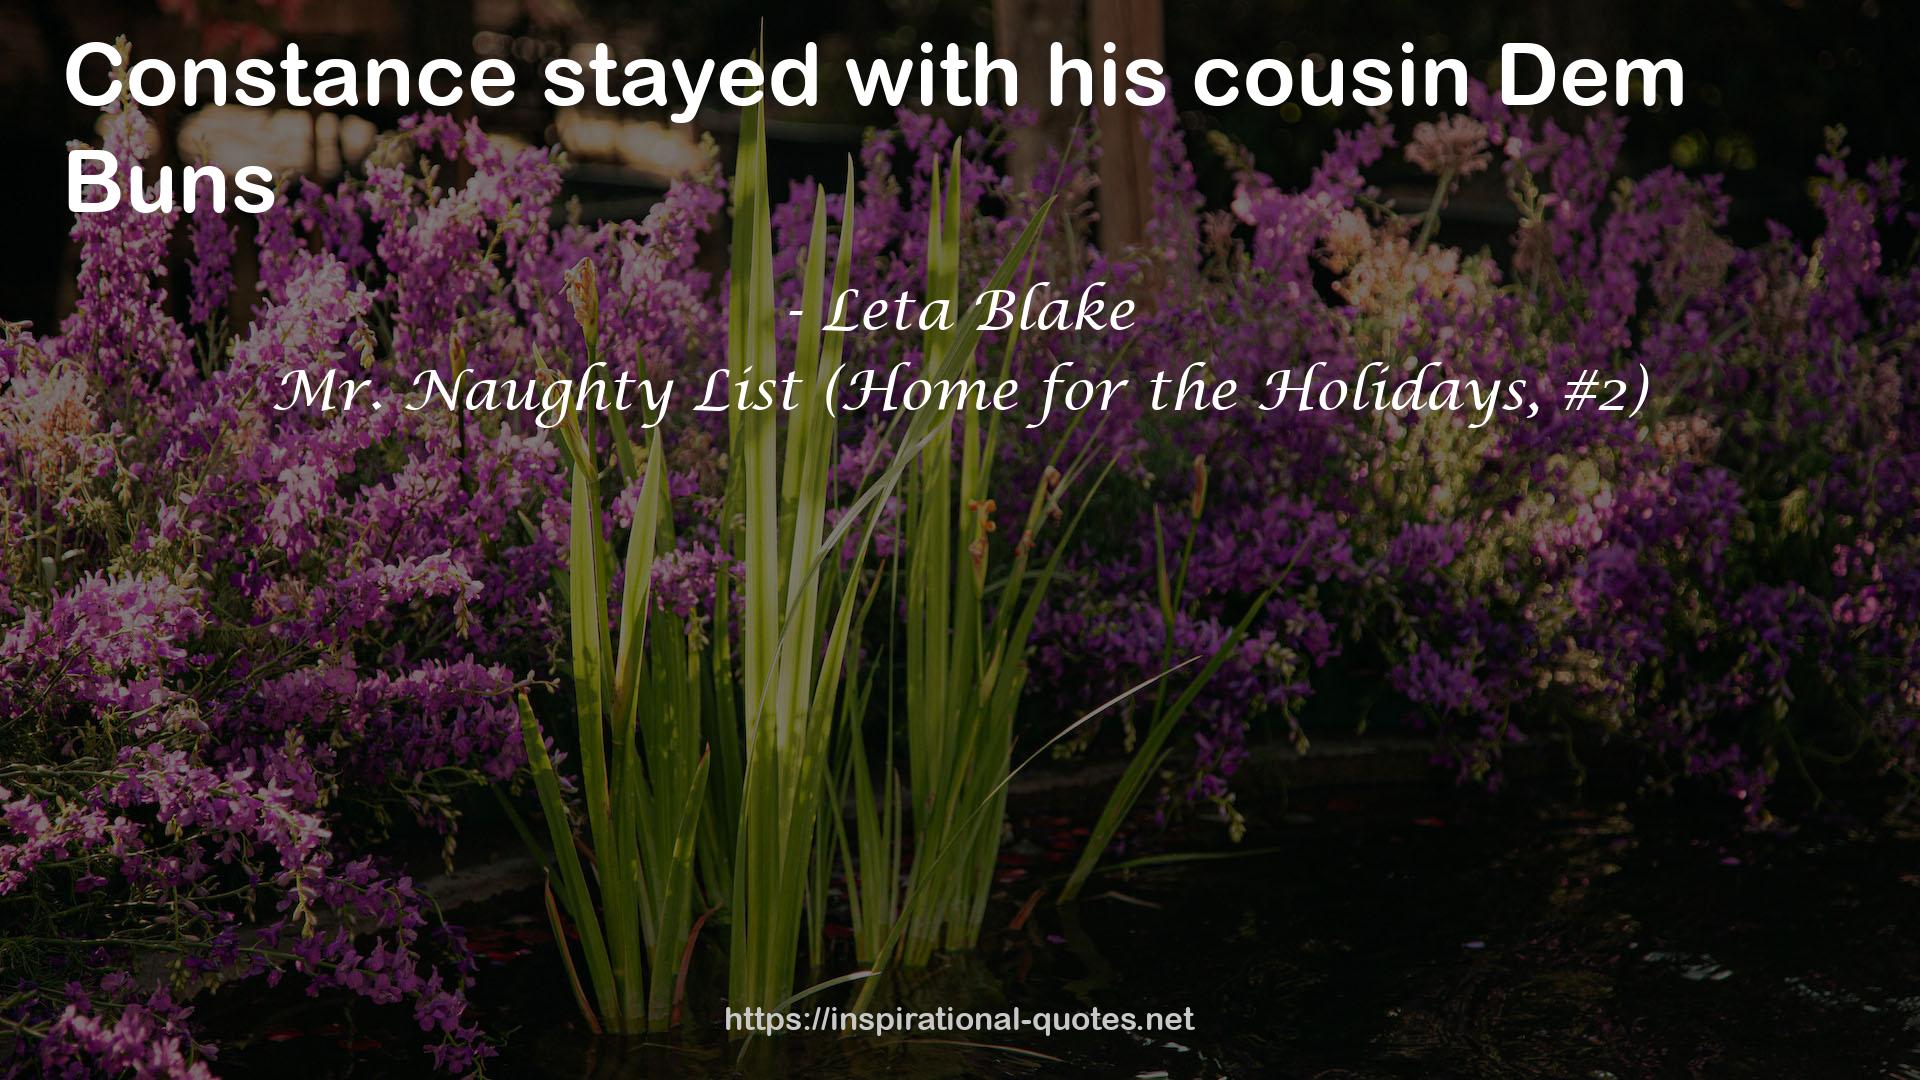 Mr. Naughty List (Home for the Holidays, #2) QUOTES